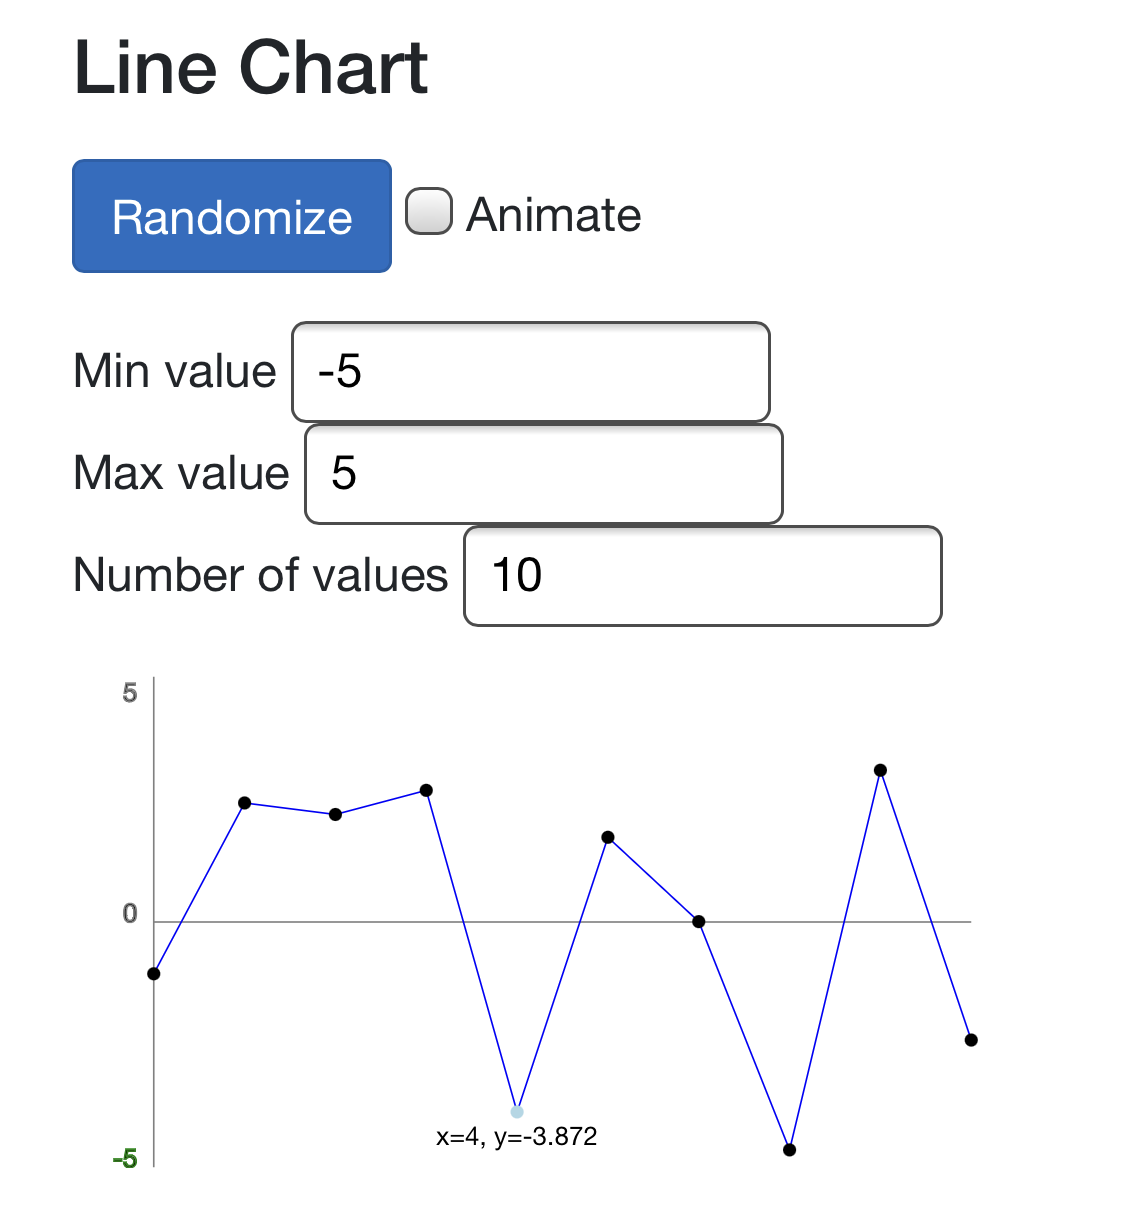 image from Draw a line chart with Blazor and SVG